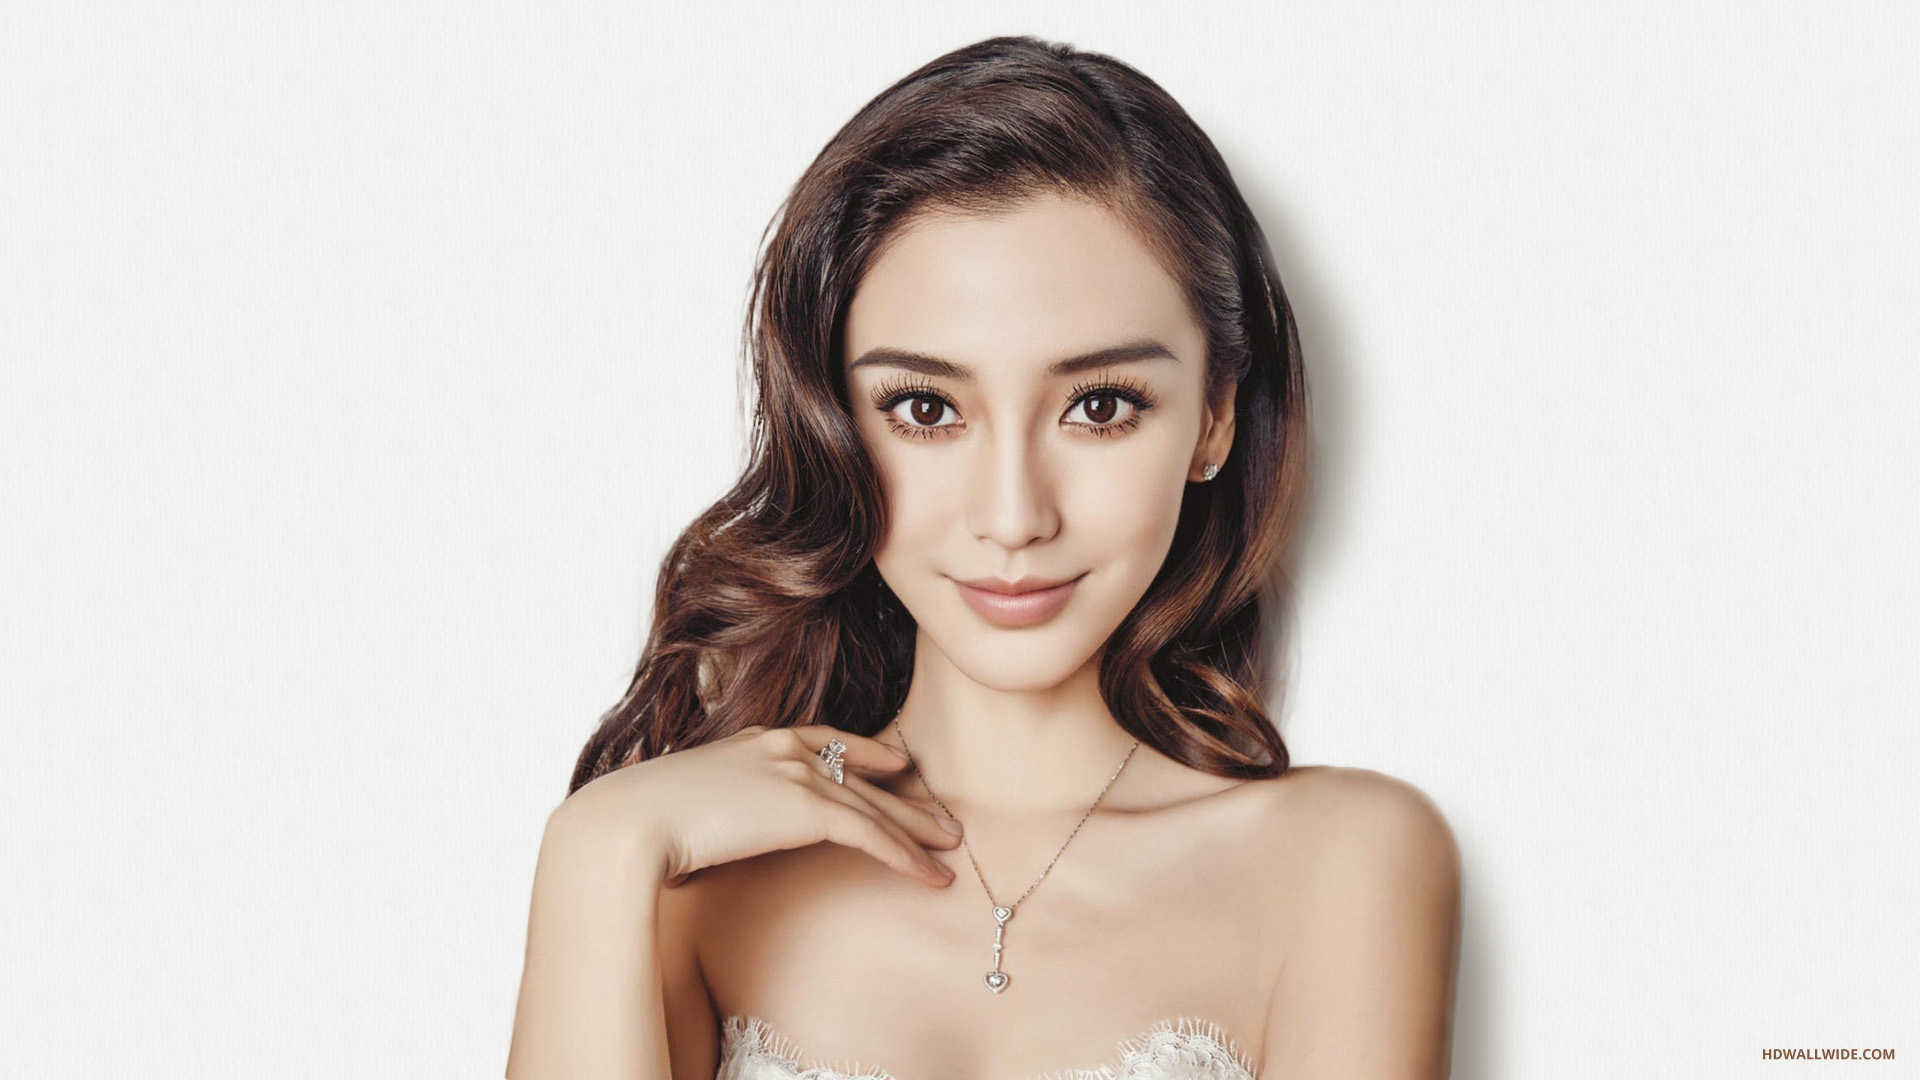 Angelababy Wallpapers Women Hq Angelababy Pictures 4k Wallpapers 19